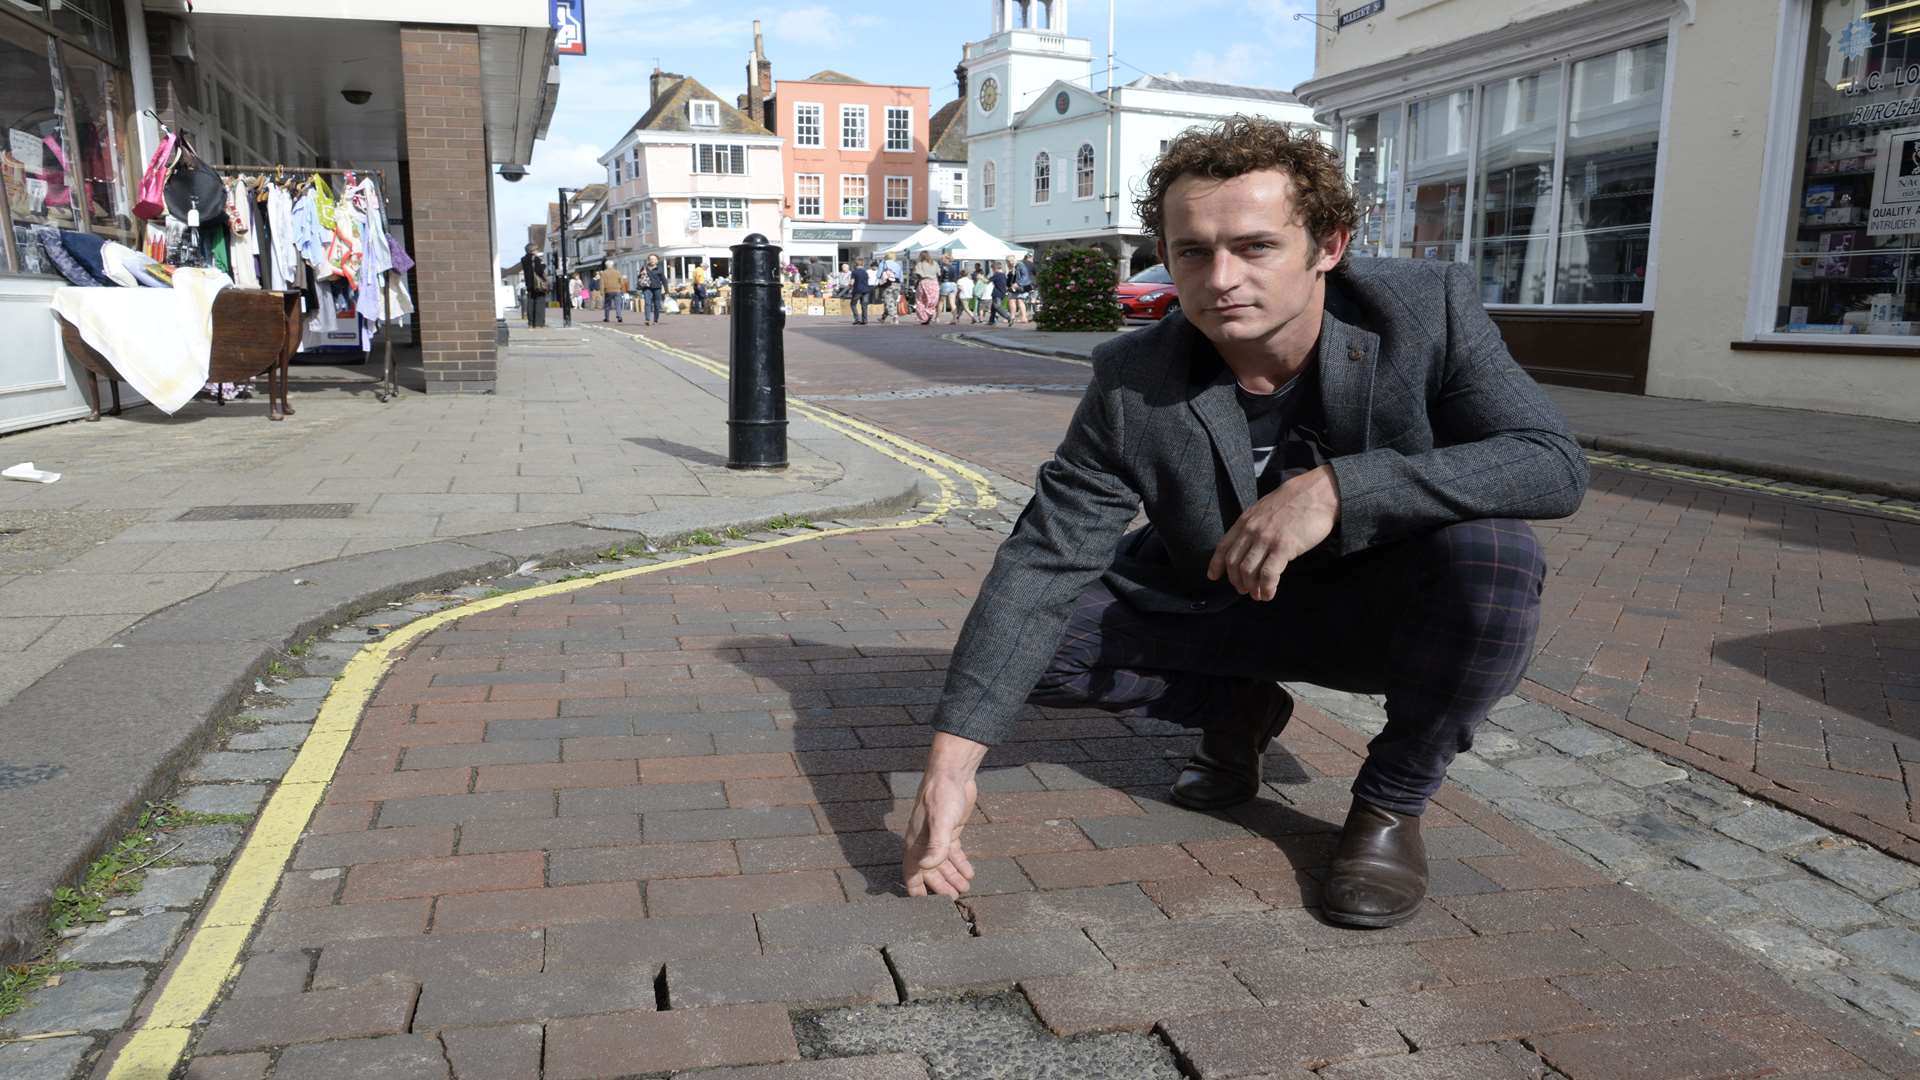 Oliver Sebastien points out the uneven cobbles where the elderly man injured himself.